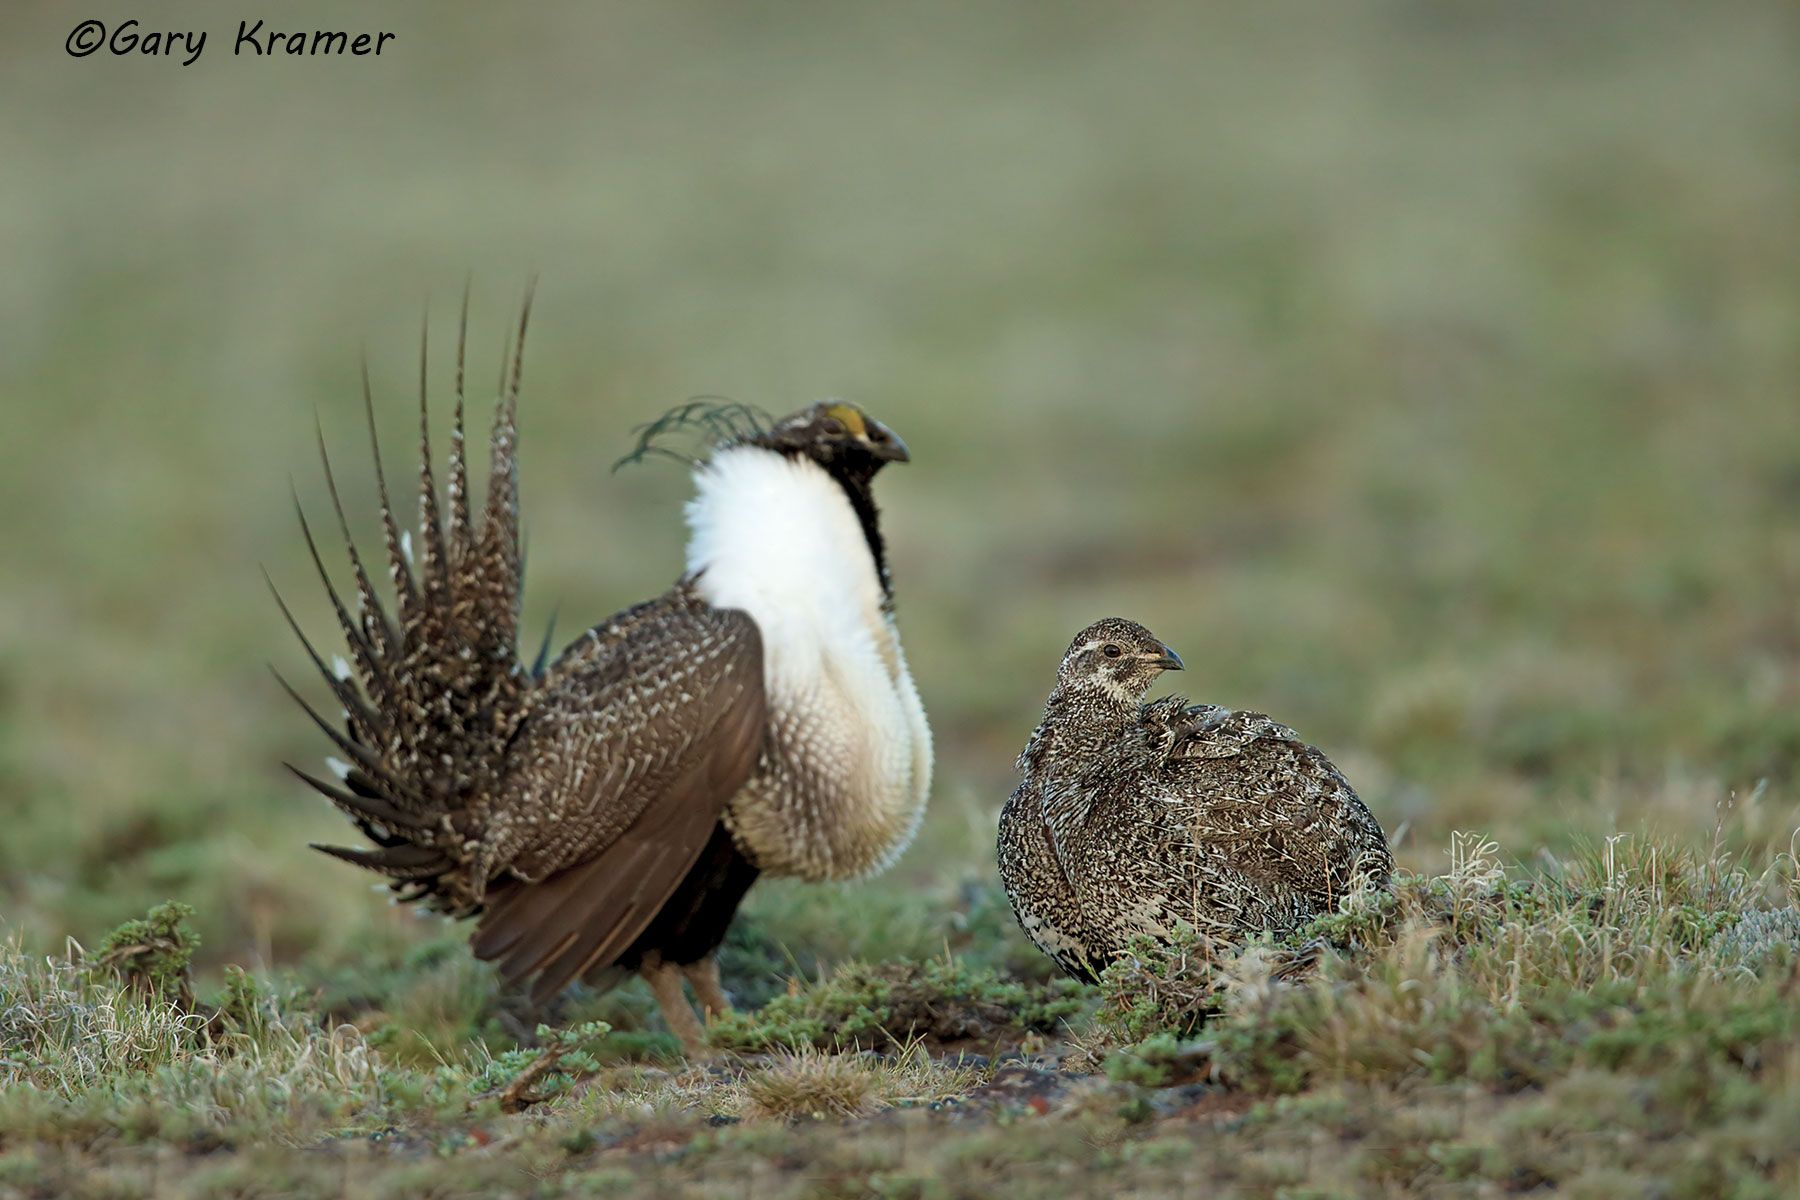 Greater Sage Grouse (Centrocercus urophasianus) - NBGGs#1126d